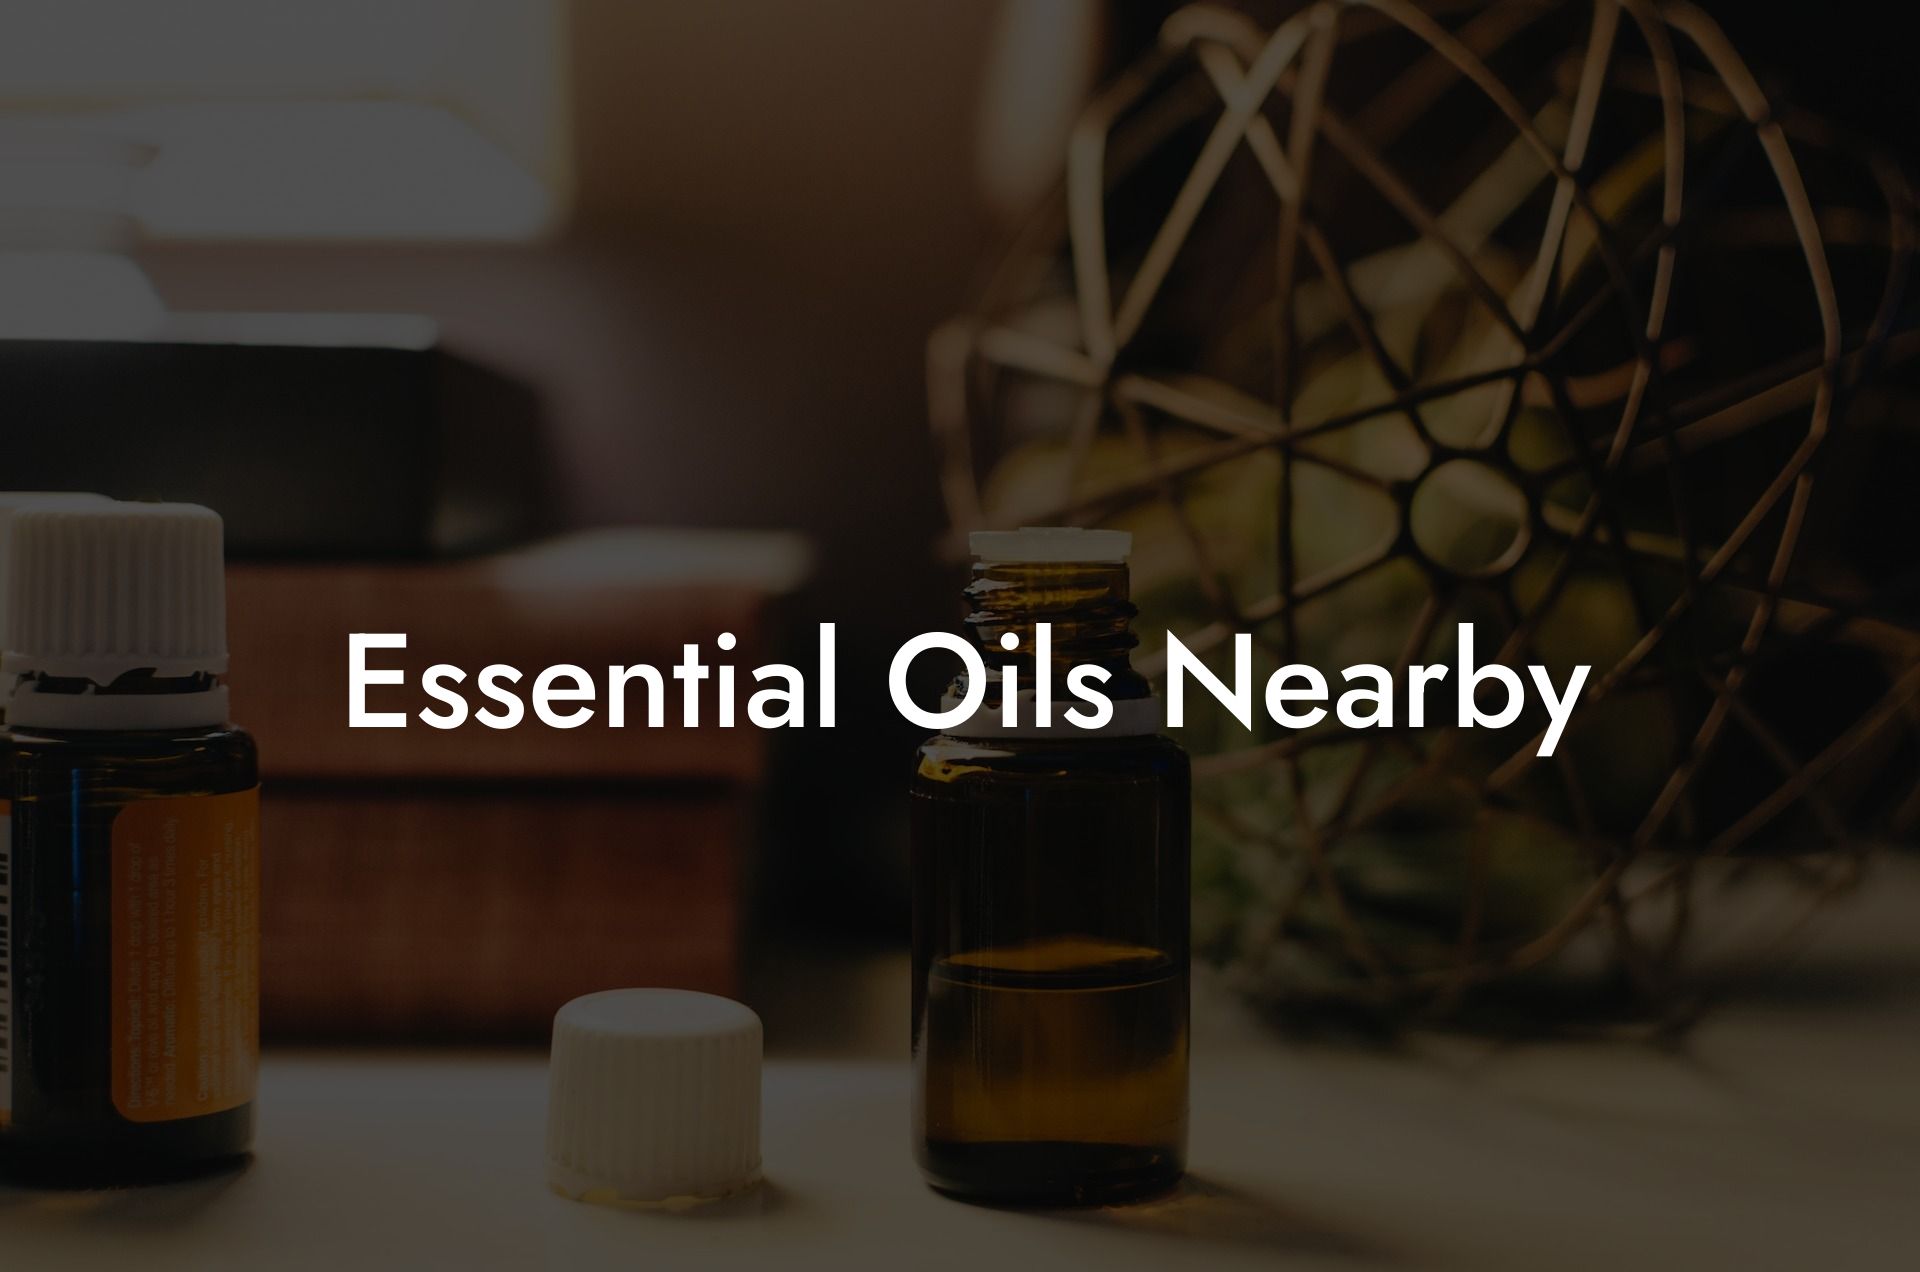 Essential Oils Nearby